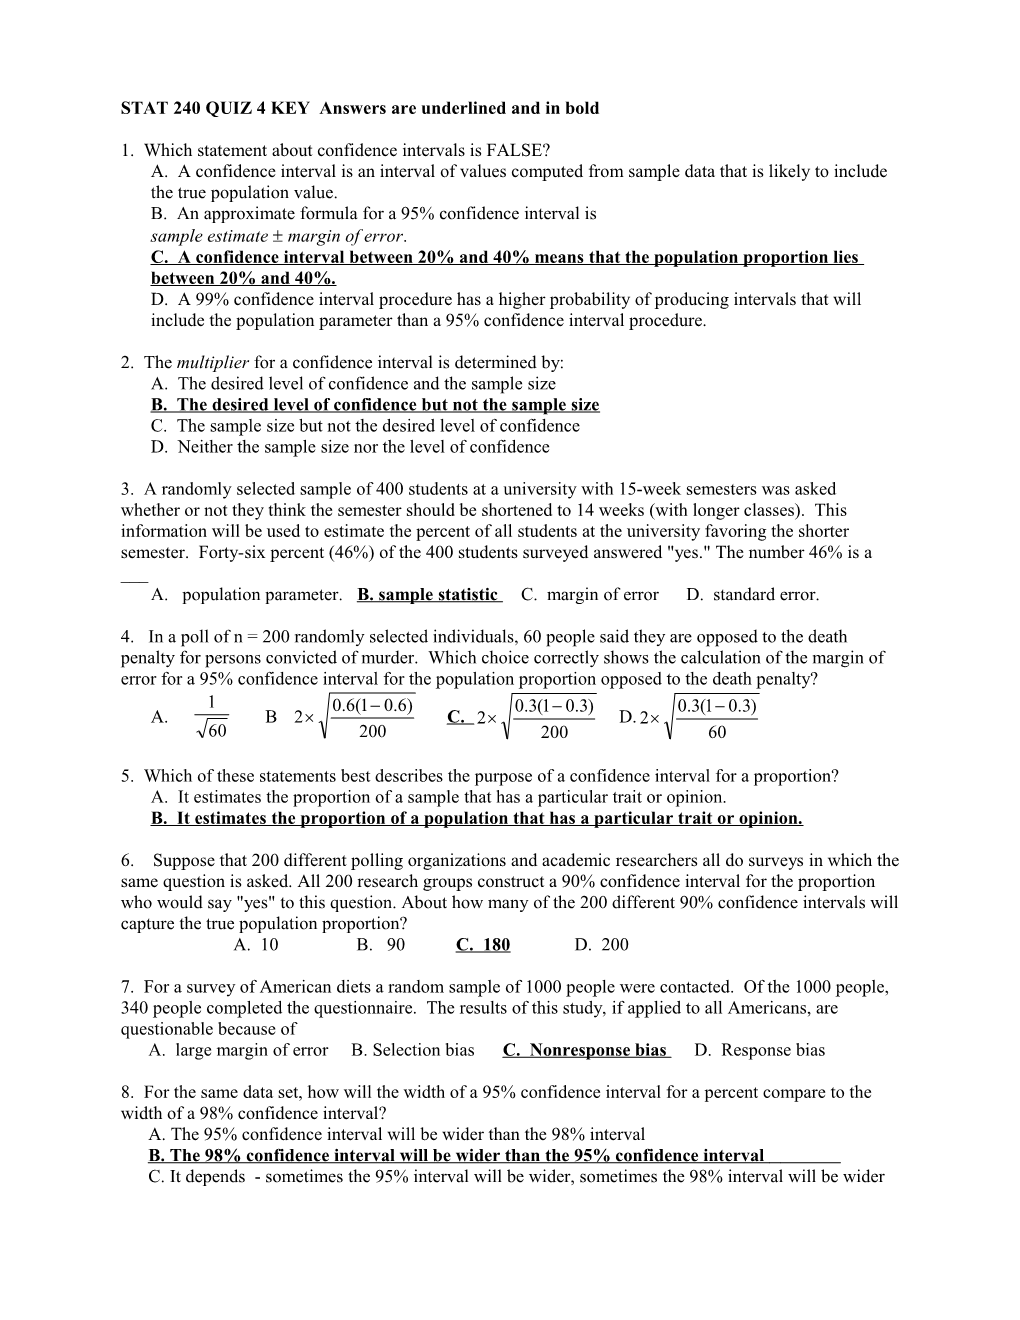 STAT 240 QUIZ 4 KEY Answers Are Underlined and in Bold